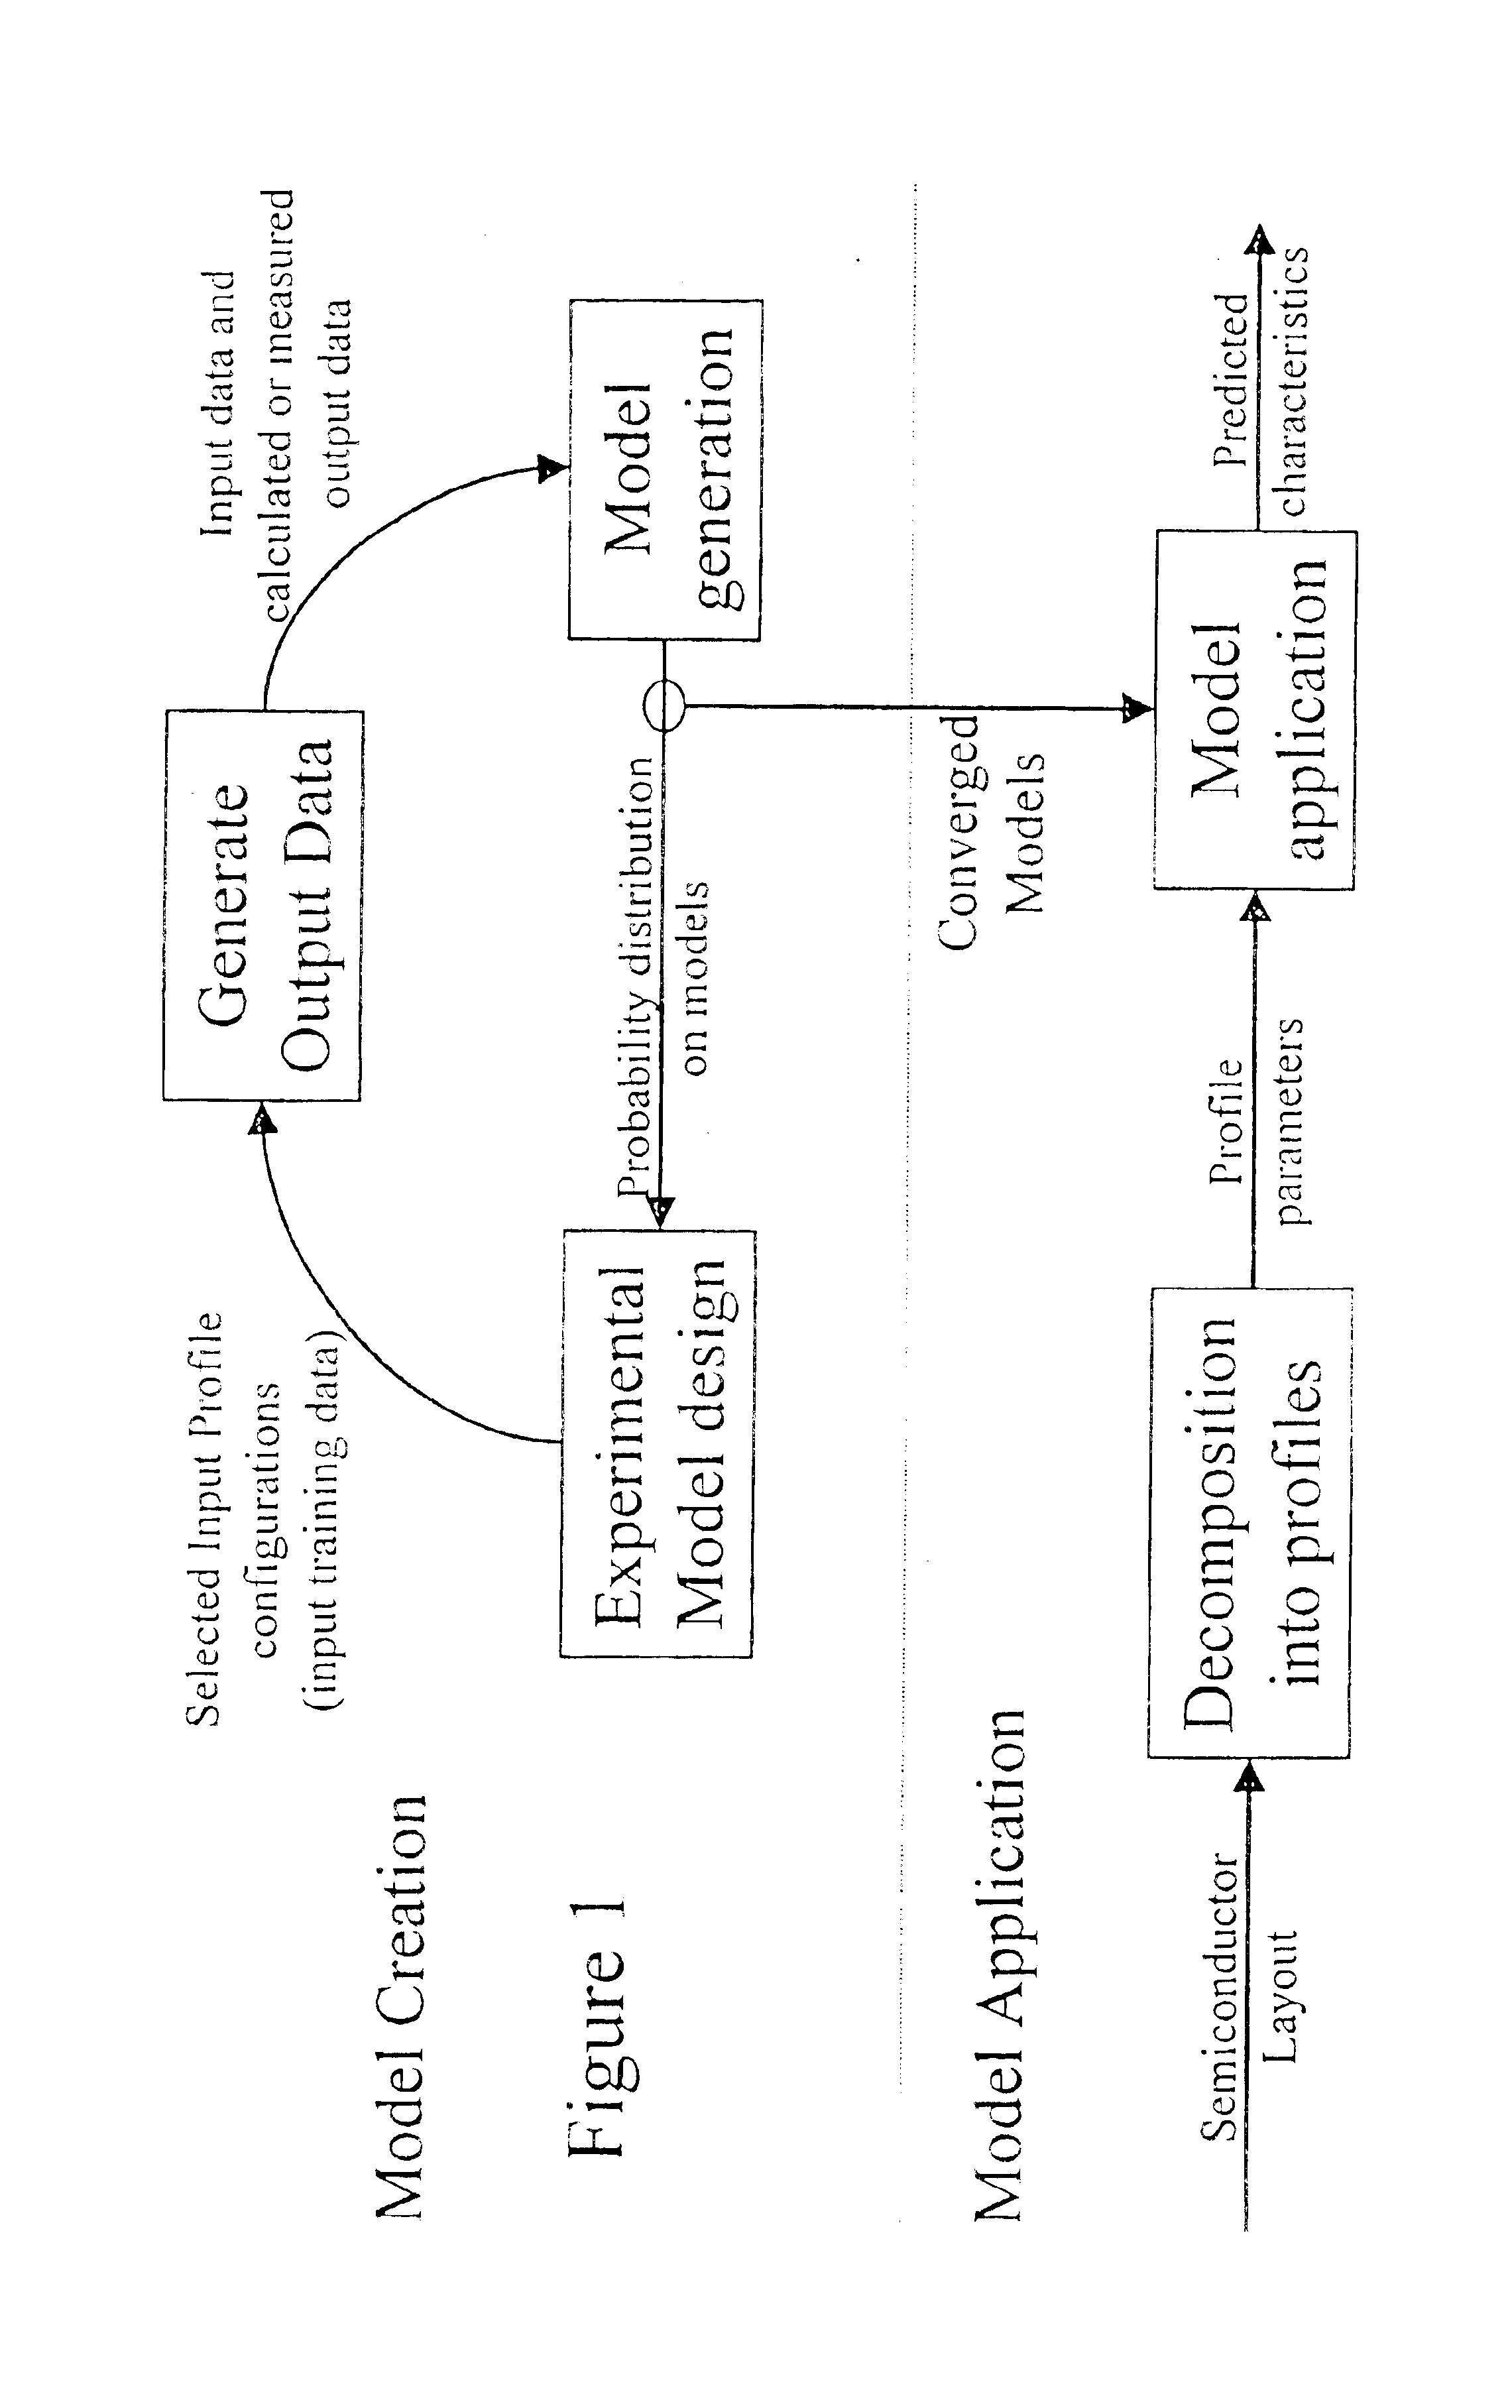 Method and apparatus for performing extraction using machine learning